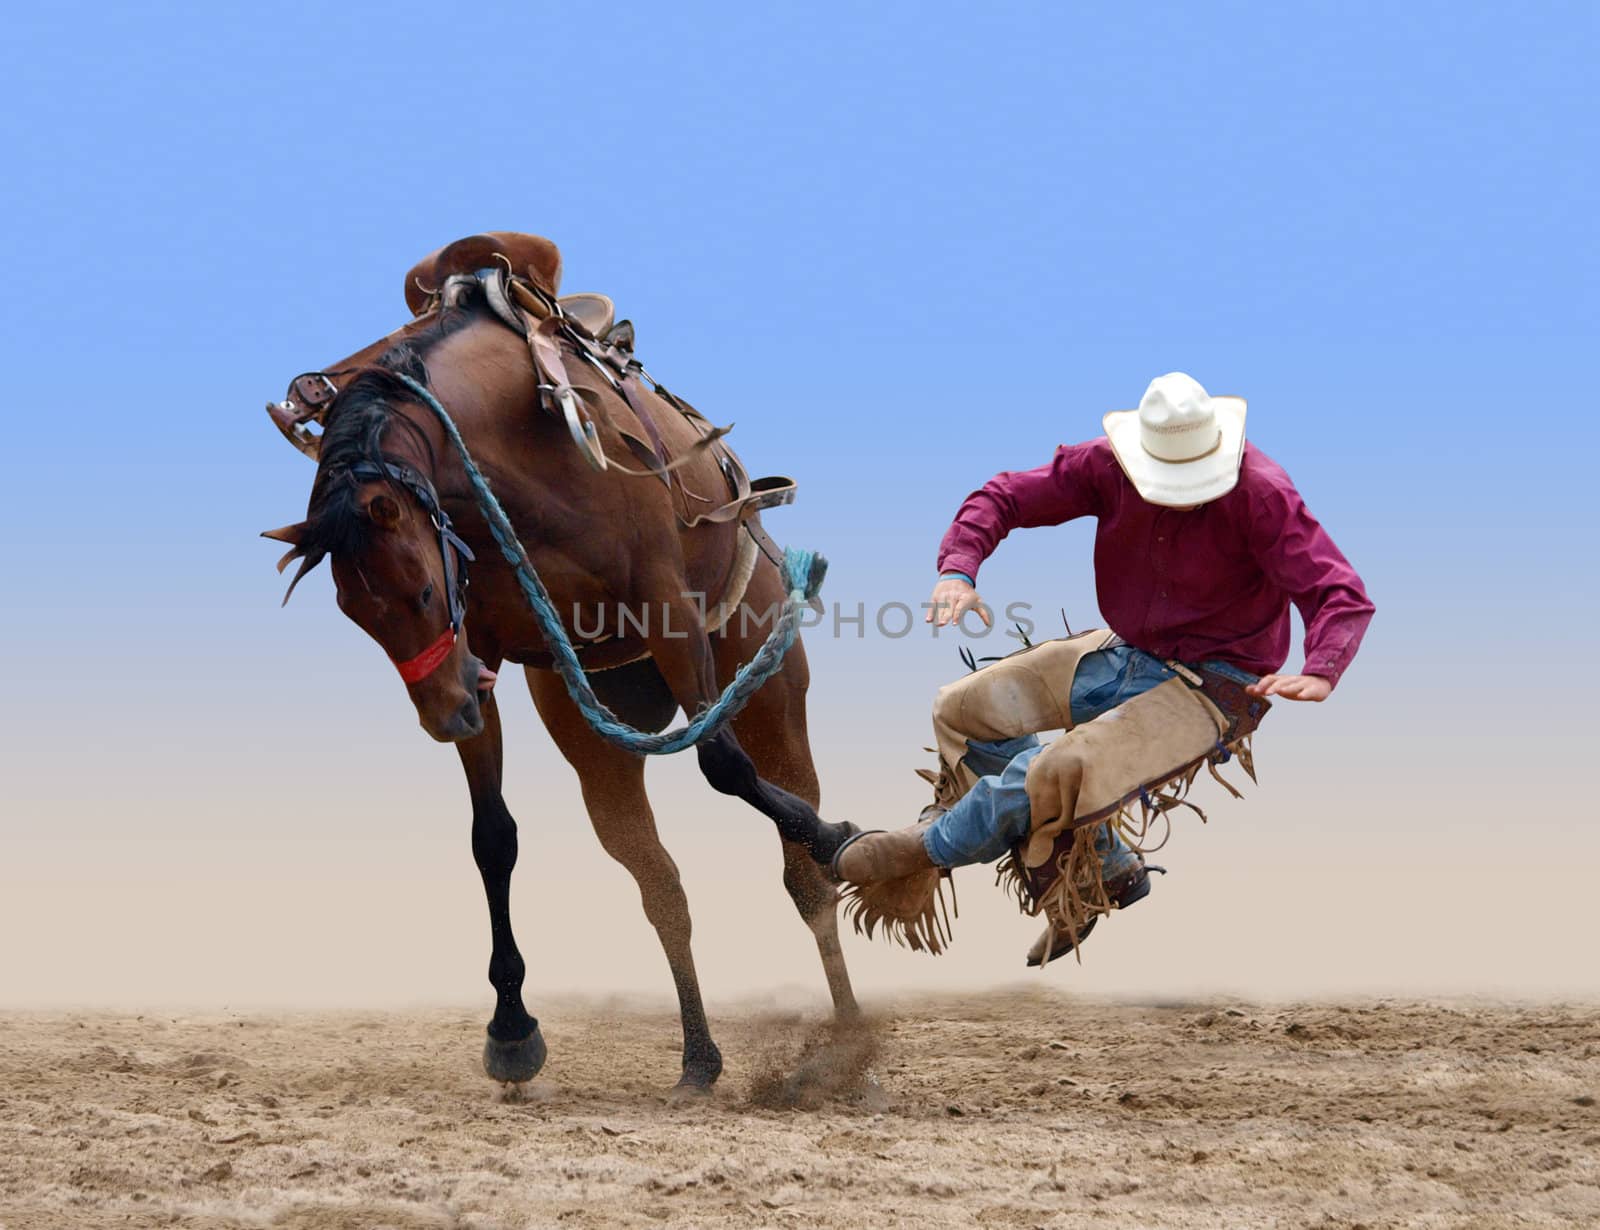 Cowboy bucked of a bucking Bronco by MargoJH